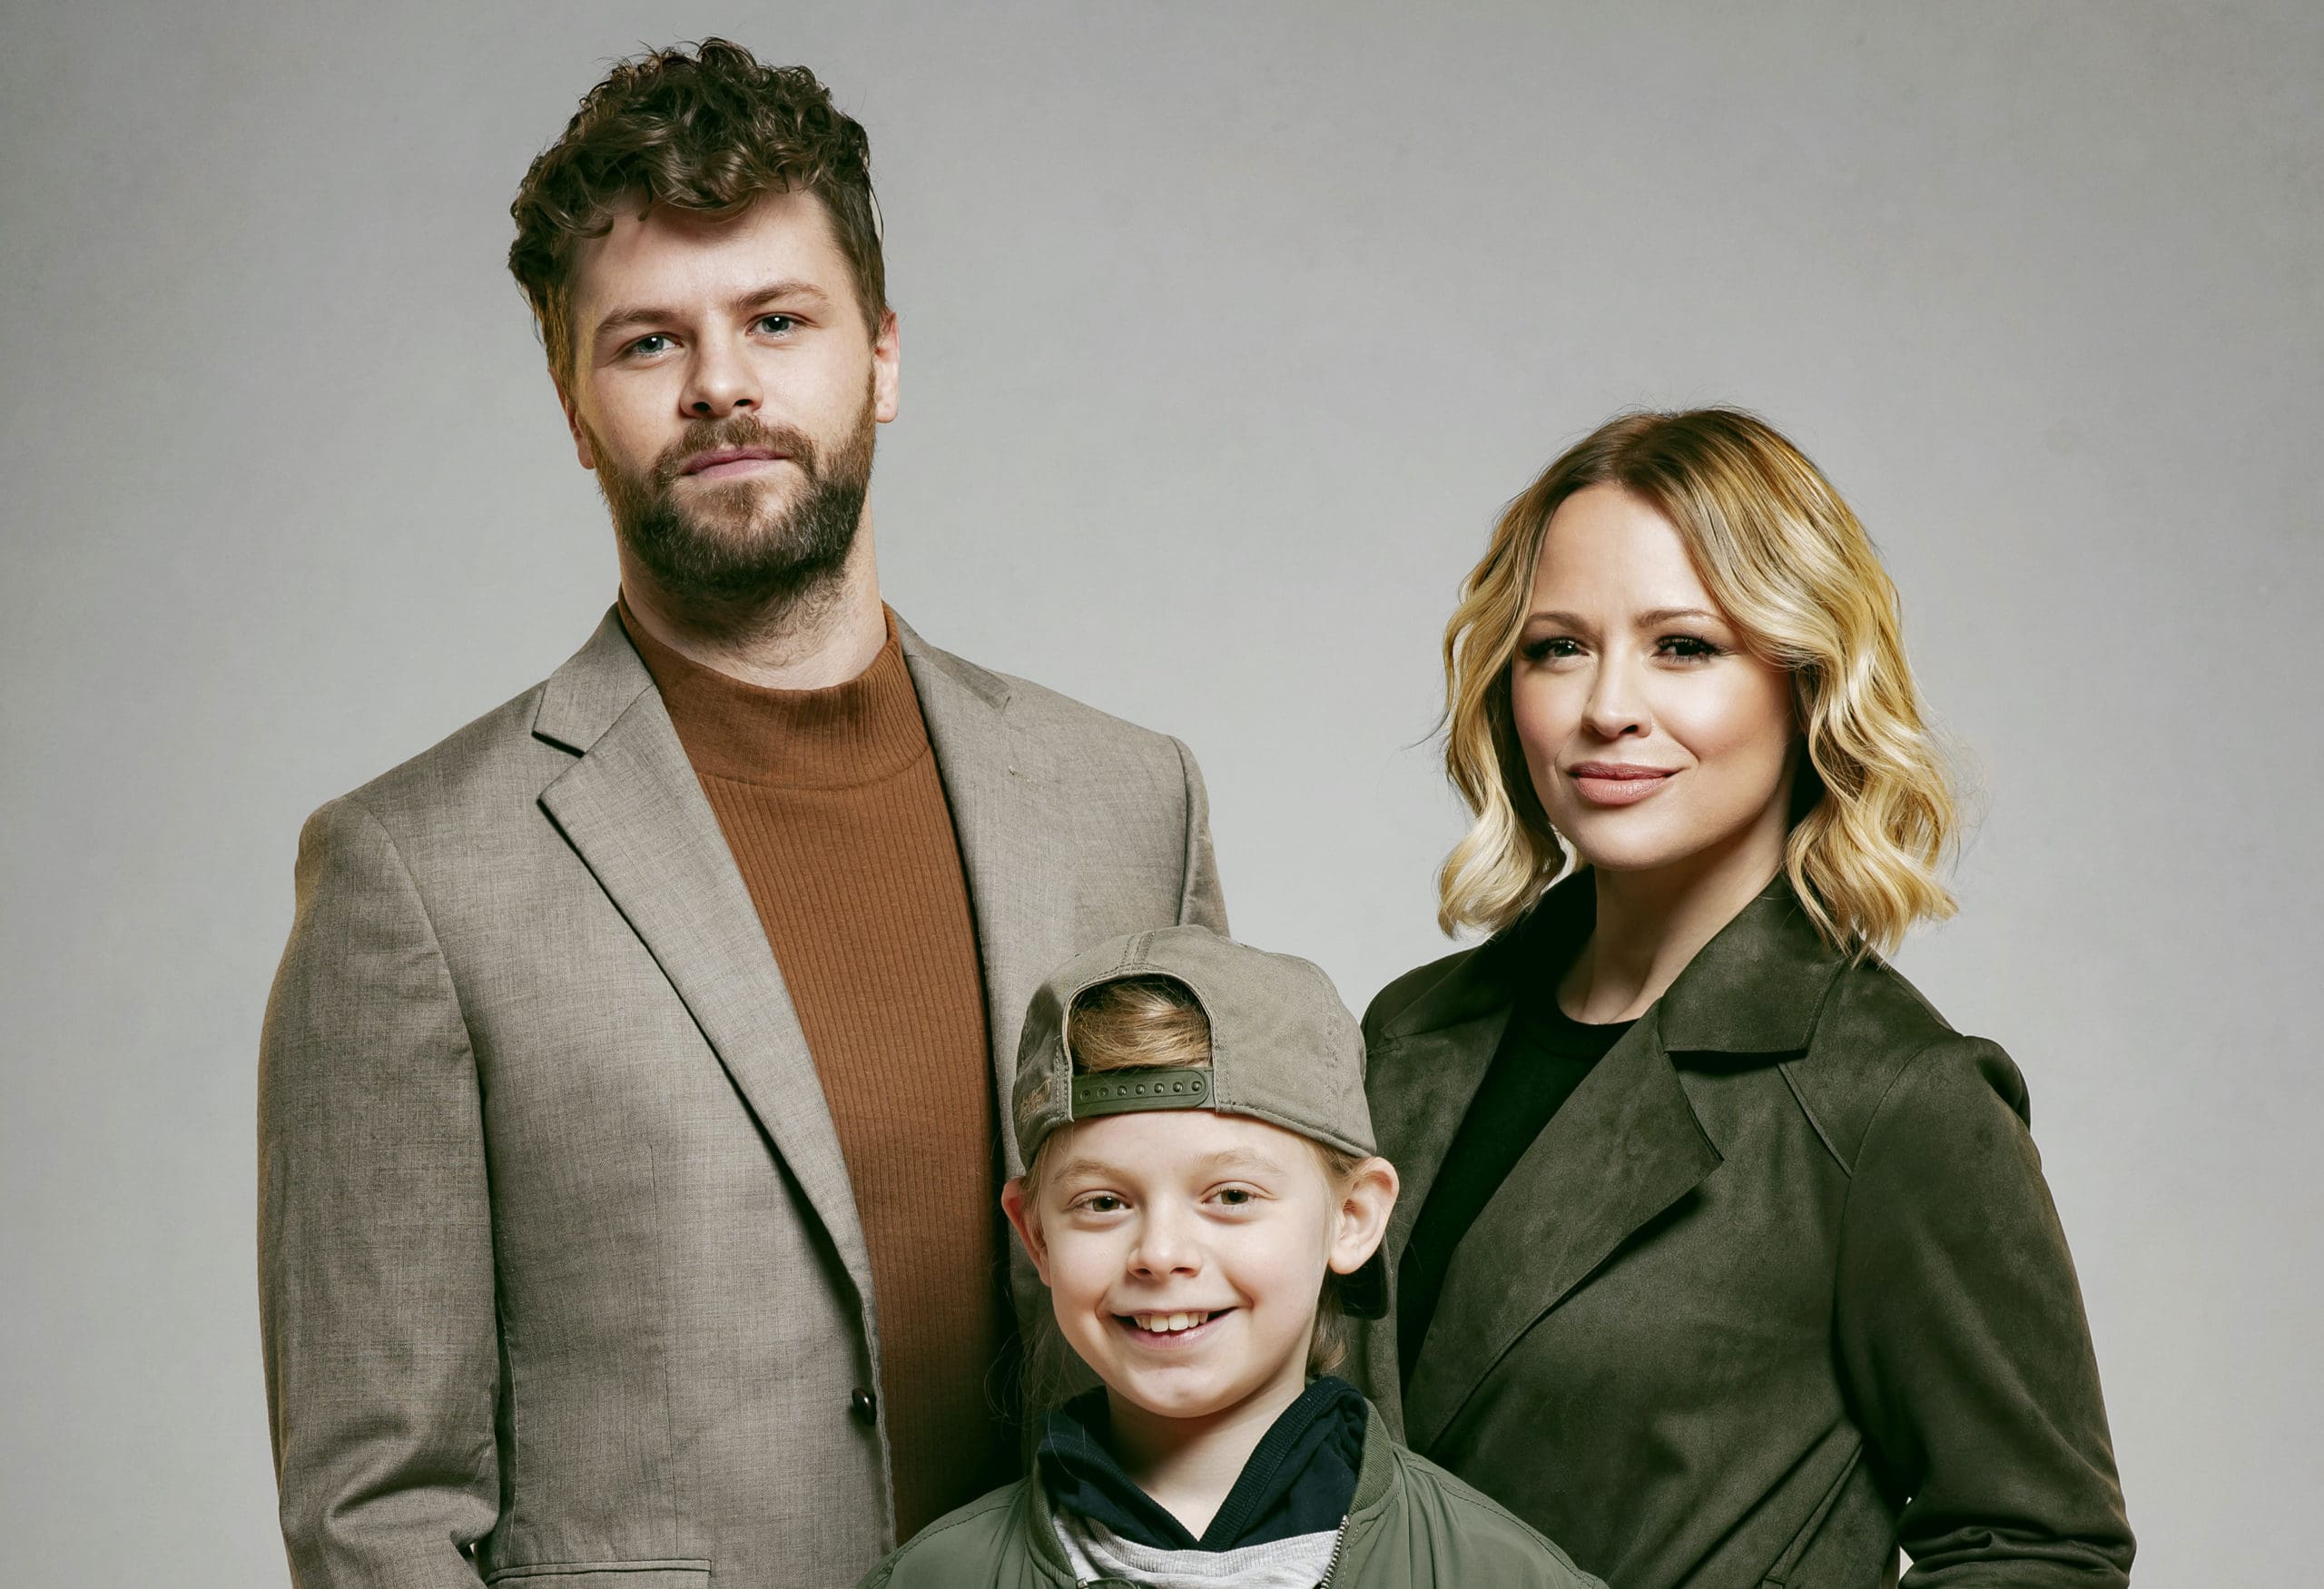 NEWS: SLEEPLESS, A Musical Romance starring Jay McGuiness and Kimberley Walsh set to begin previews in August